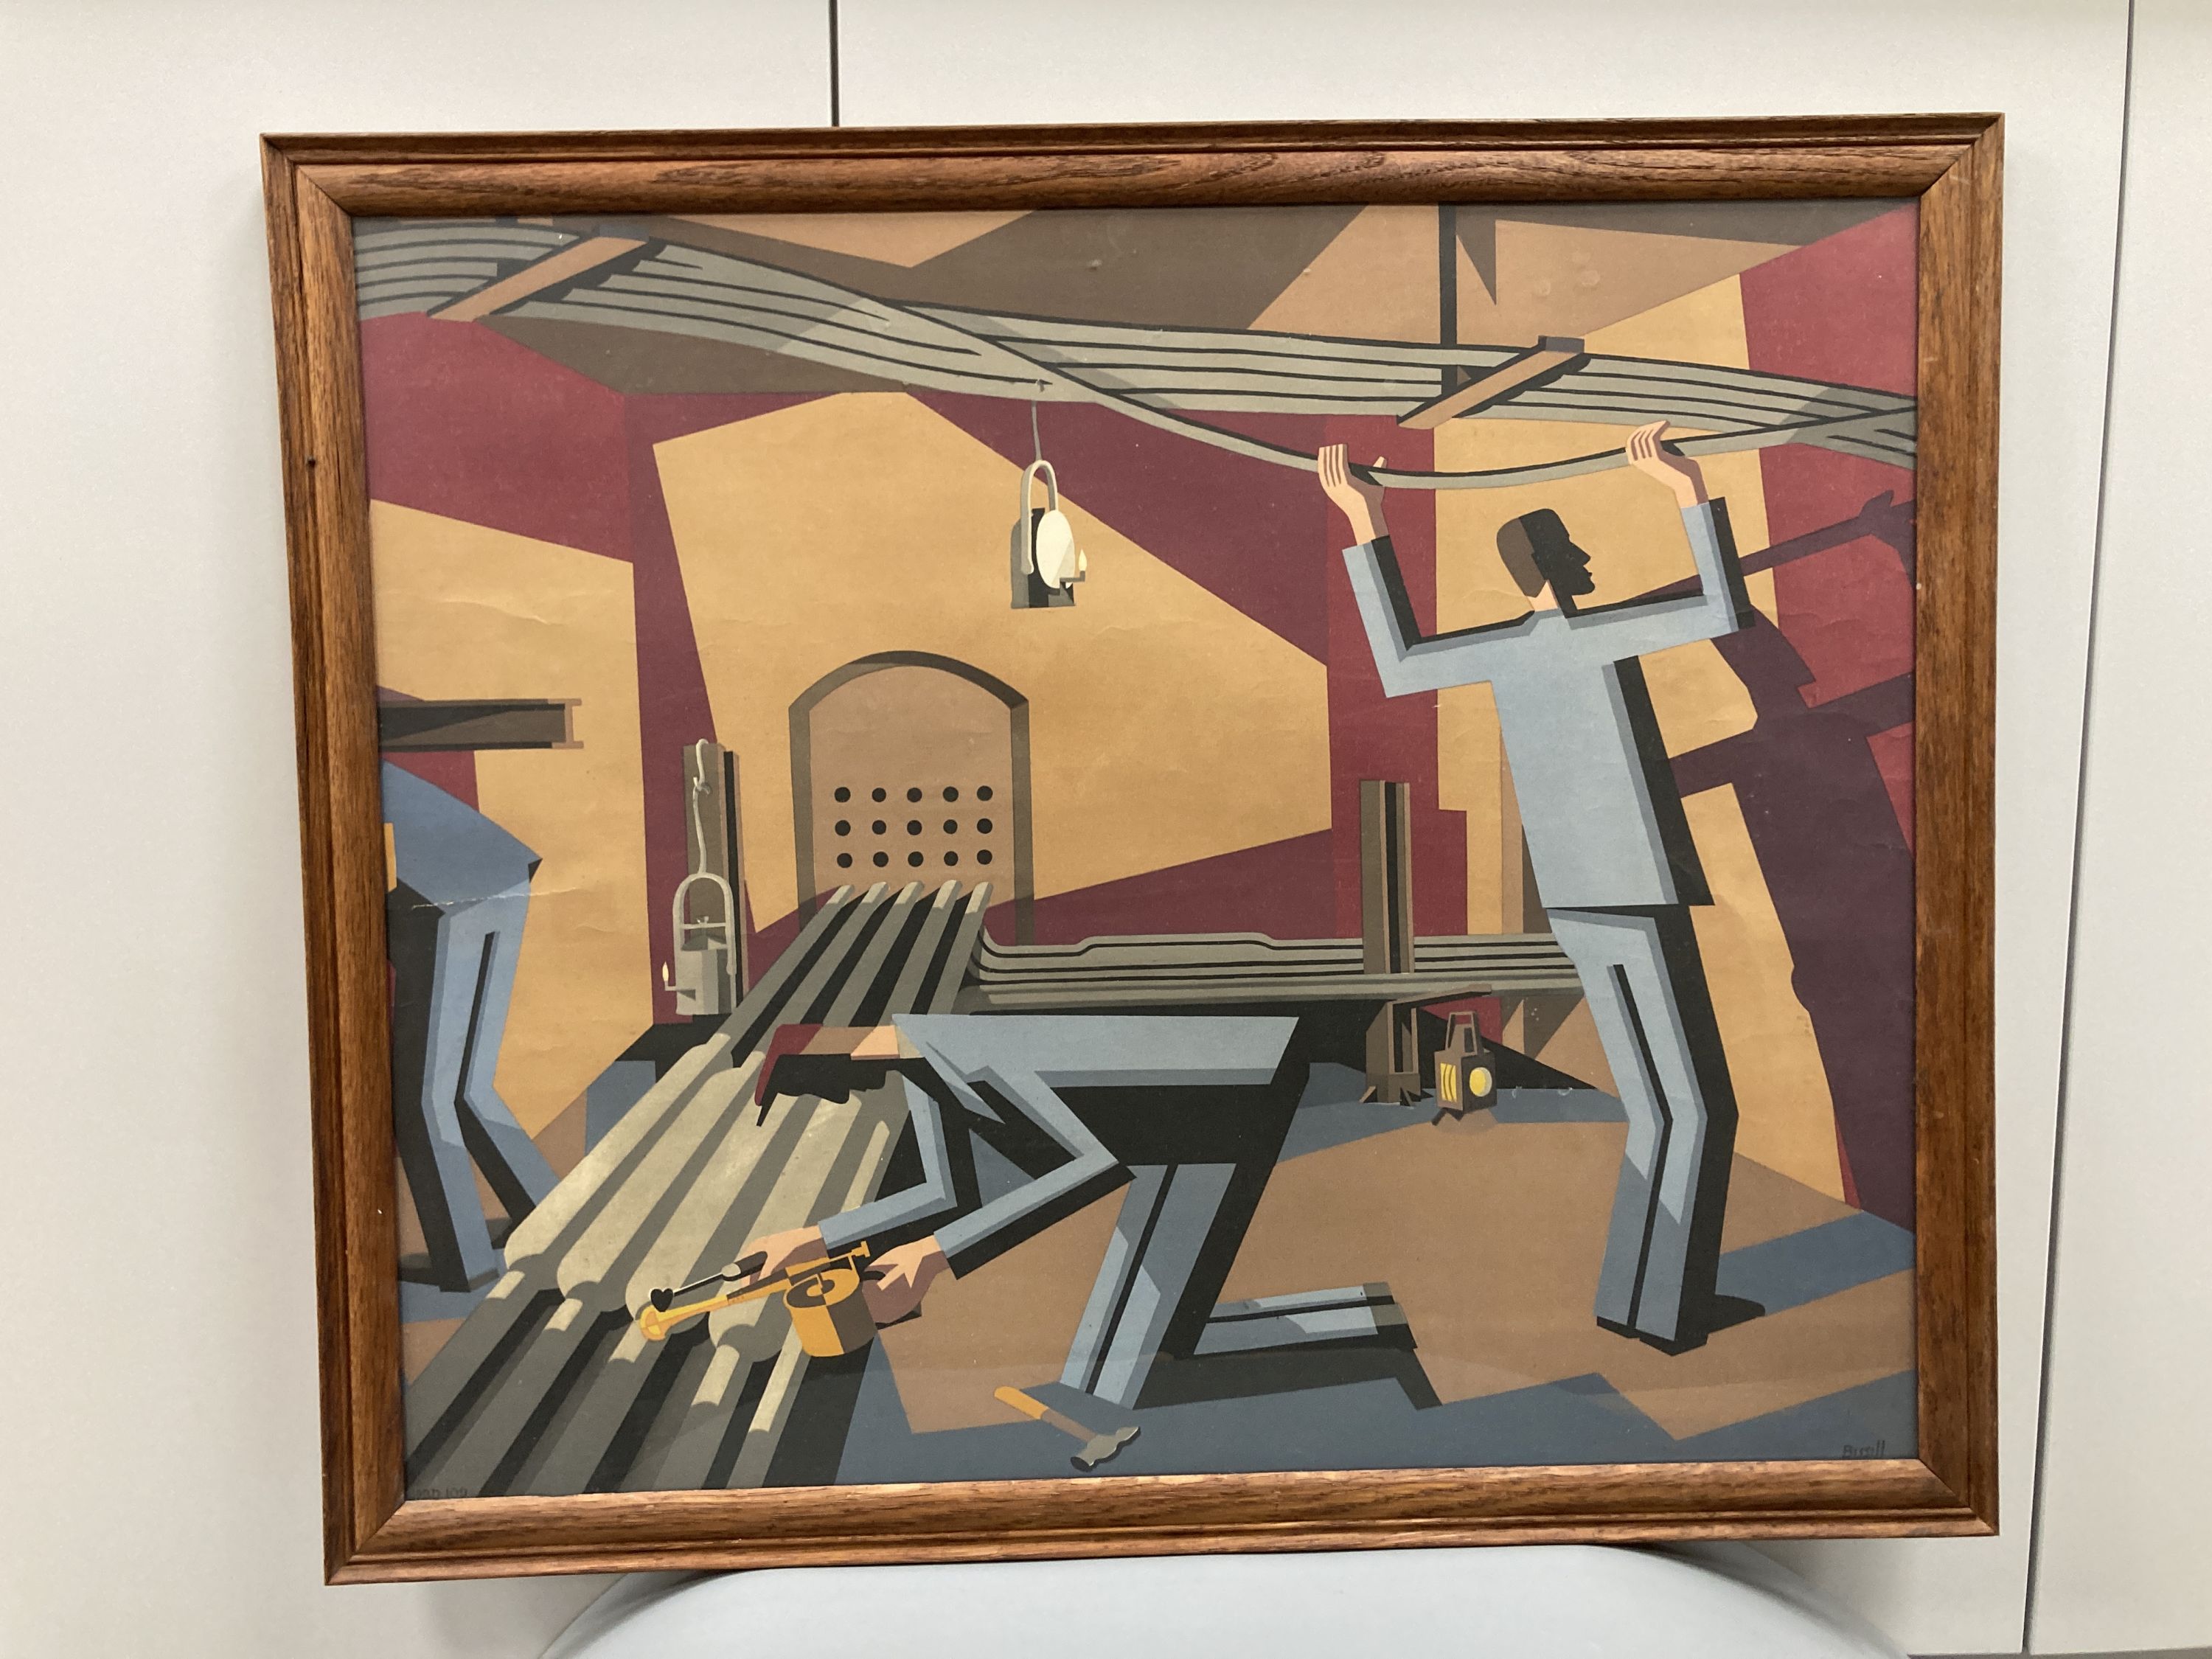 George William Bissell (1896-1973), colour print, Construction workers, 49 x 59cm